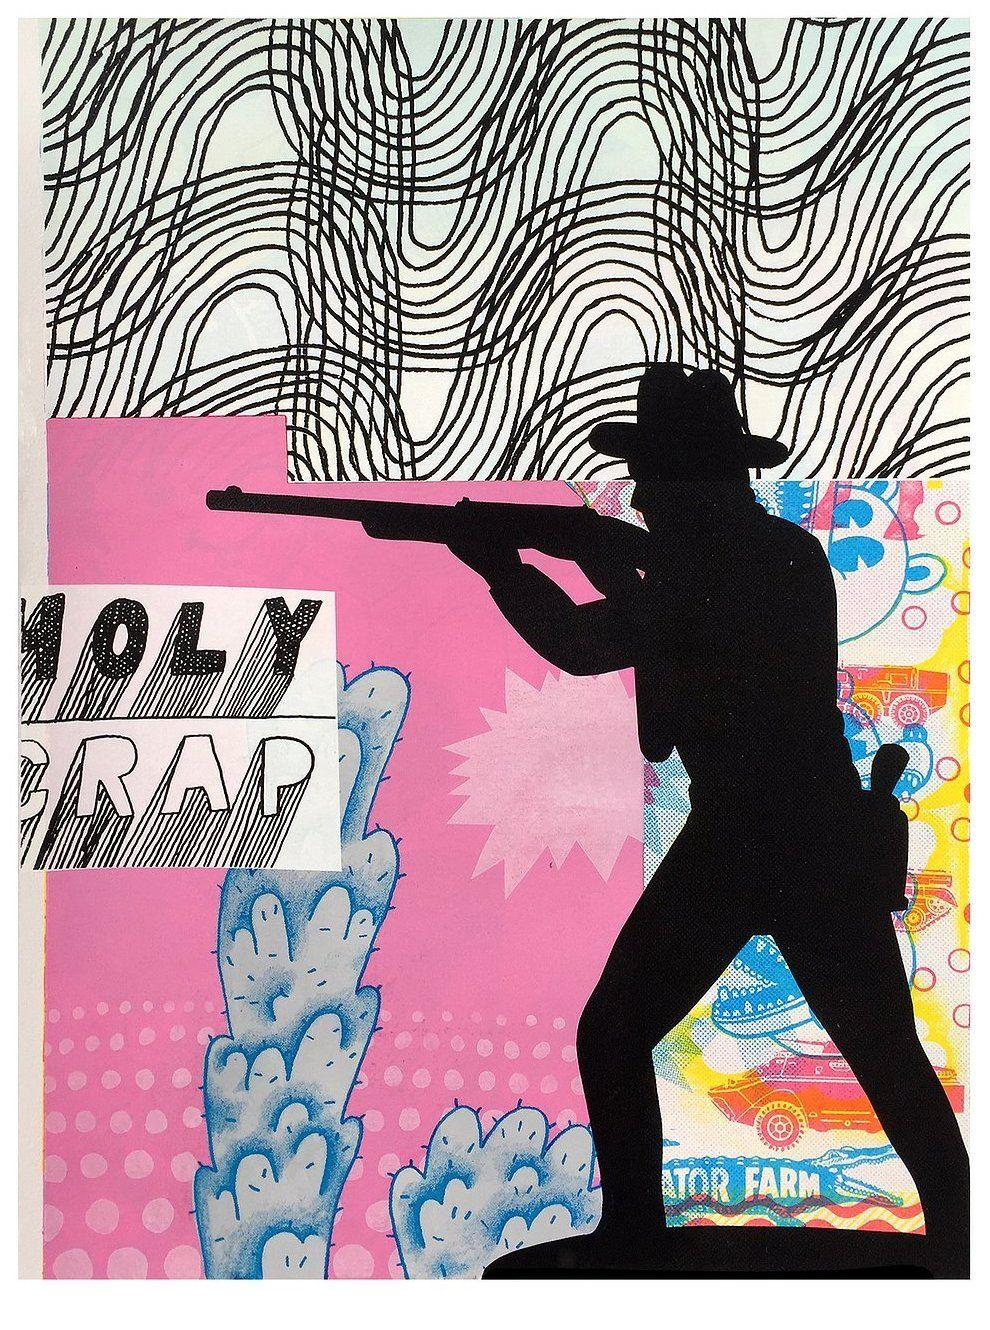 Chadwick Tolley Abstract Print - Holy Crap (2/10)